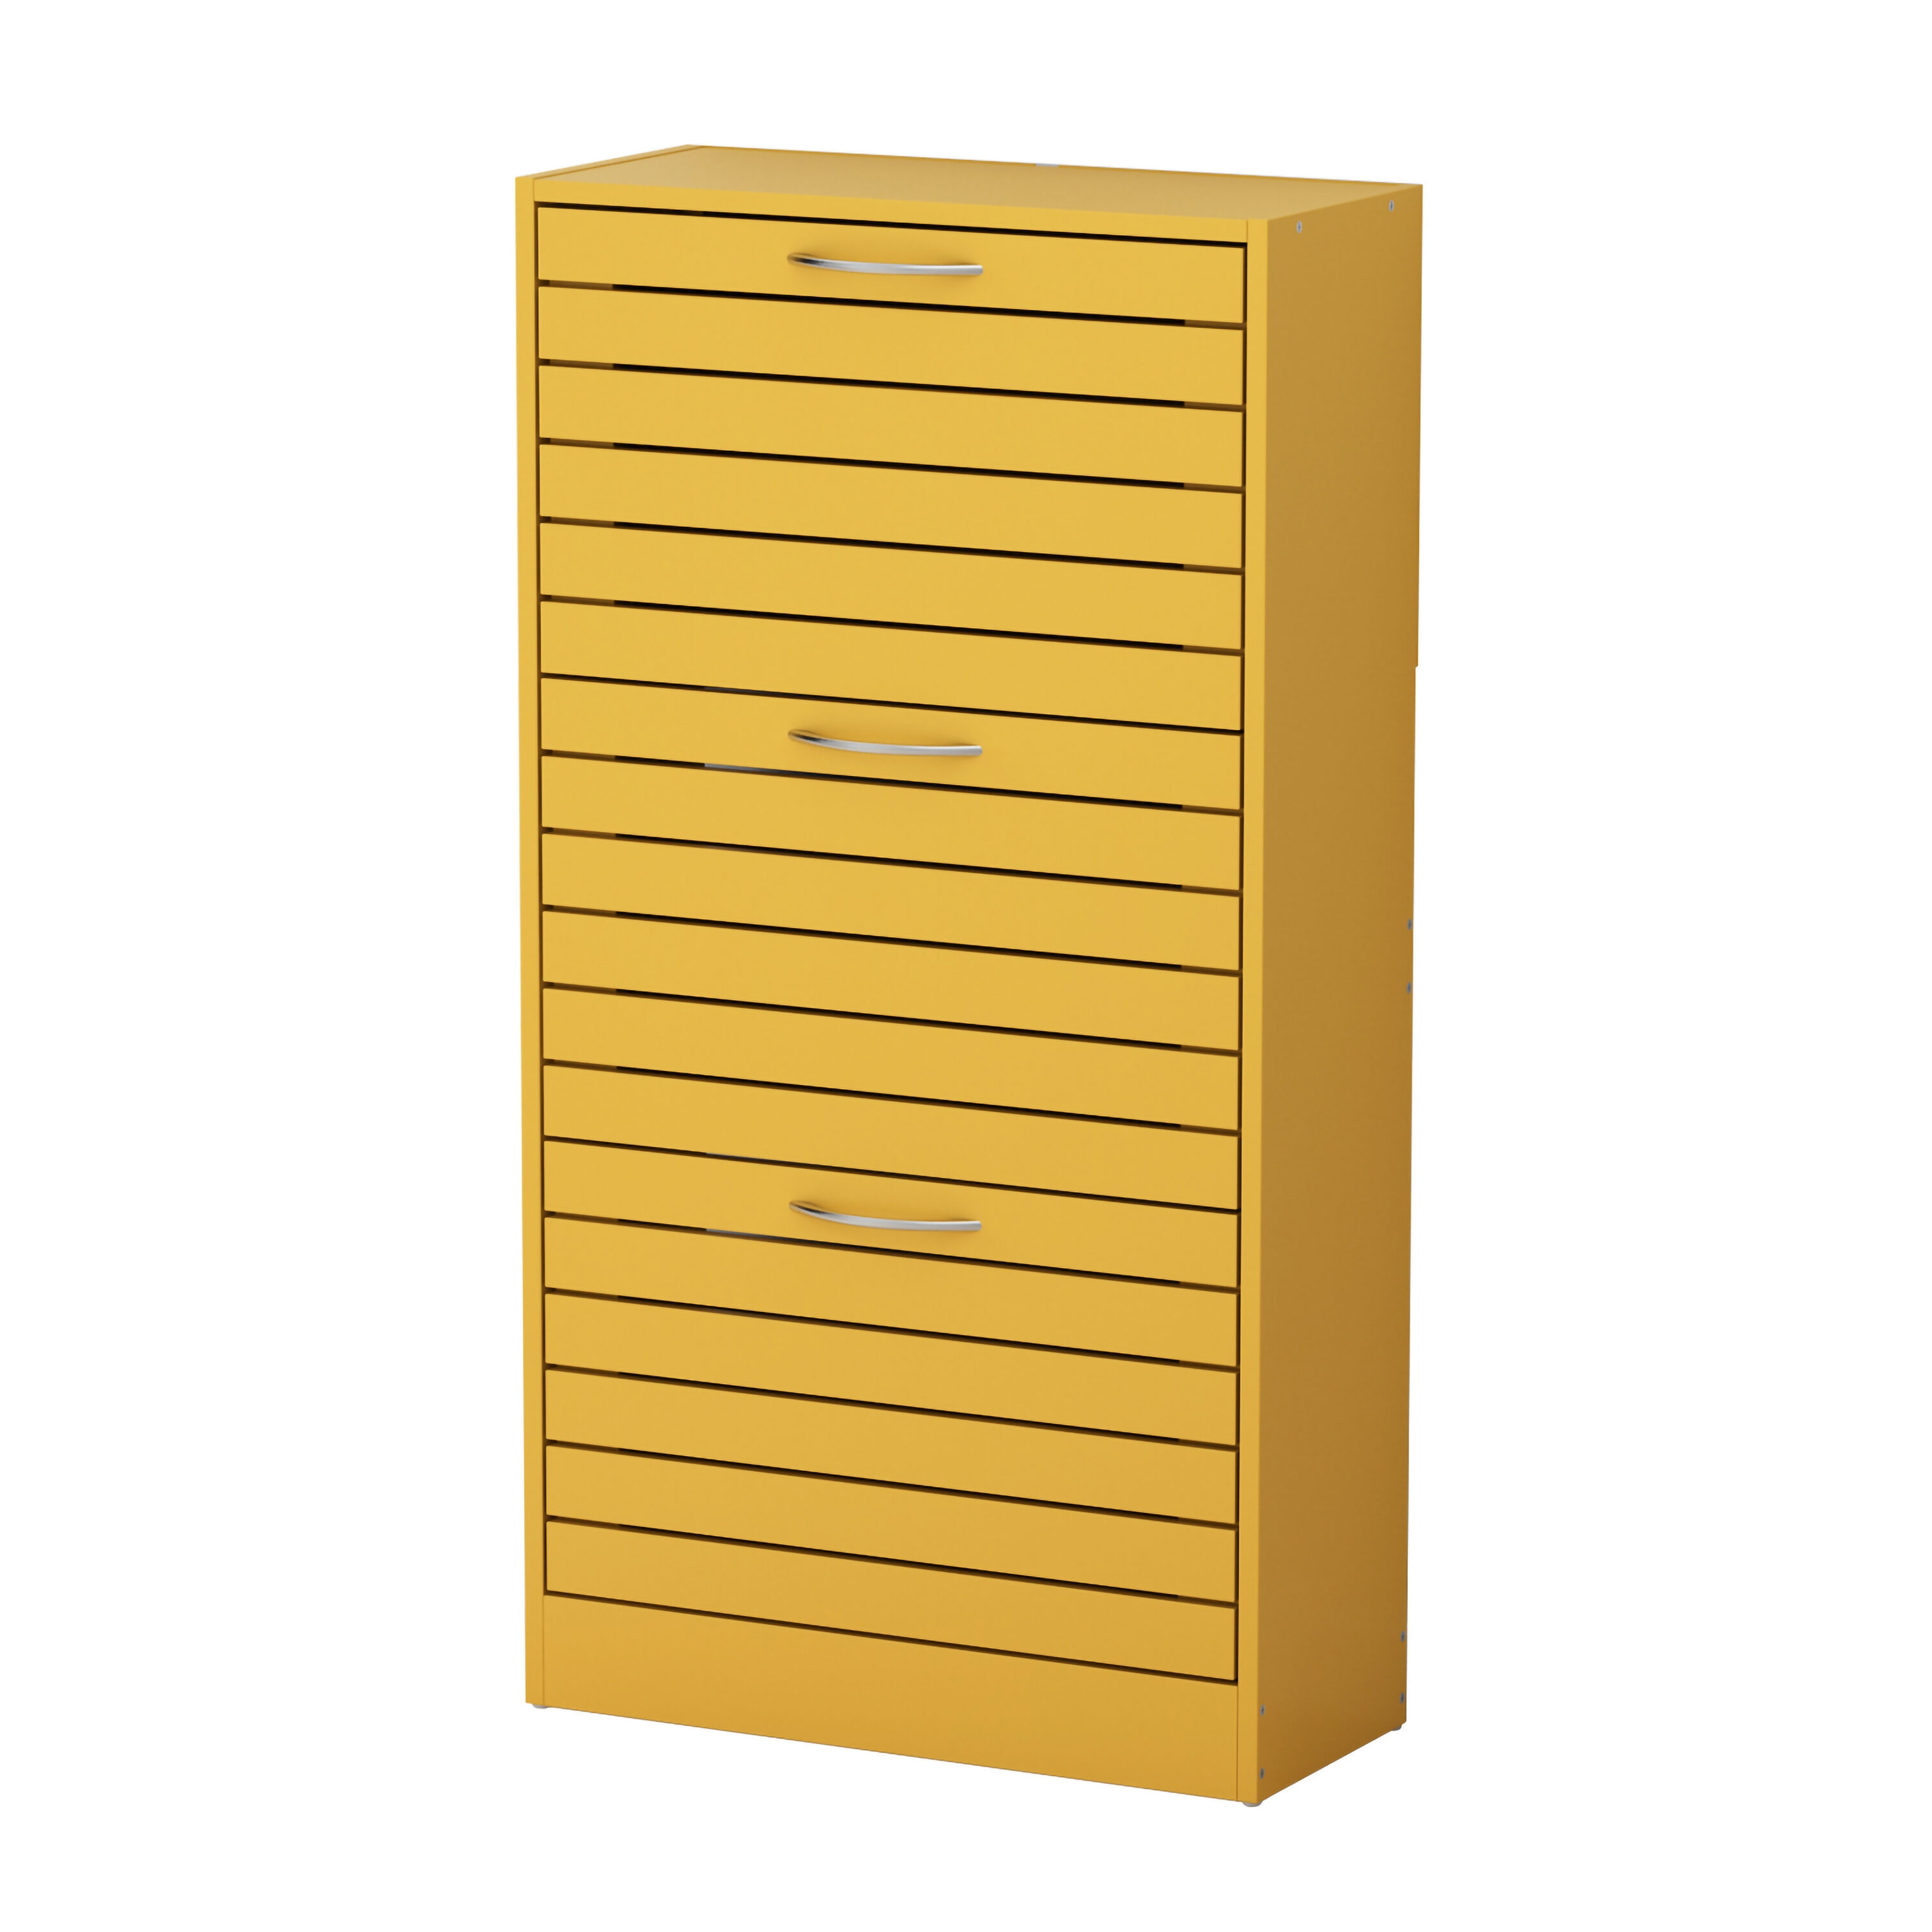 FUFU&GAGA 42.3-in H 3 Tier Composite Cabinet Shoe 10 department in Shoe Yellow the Storage Pair at